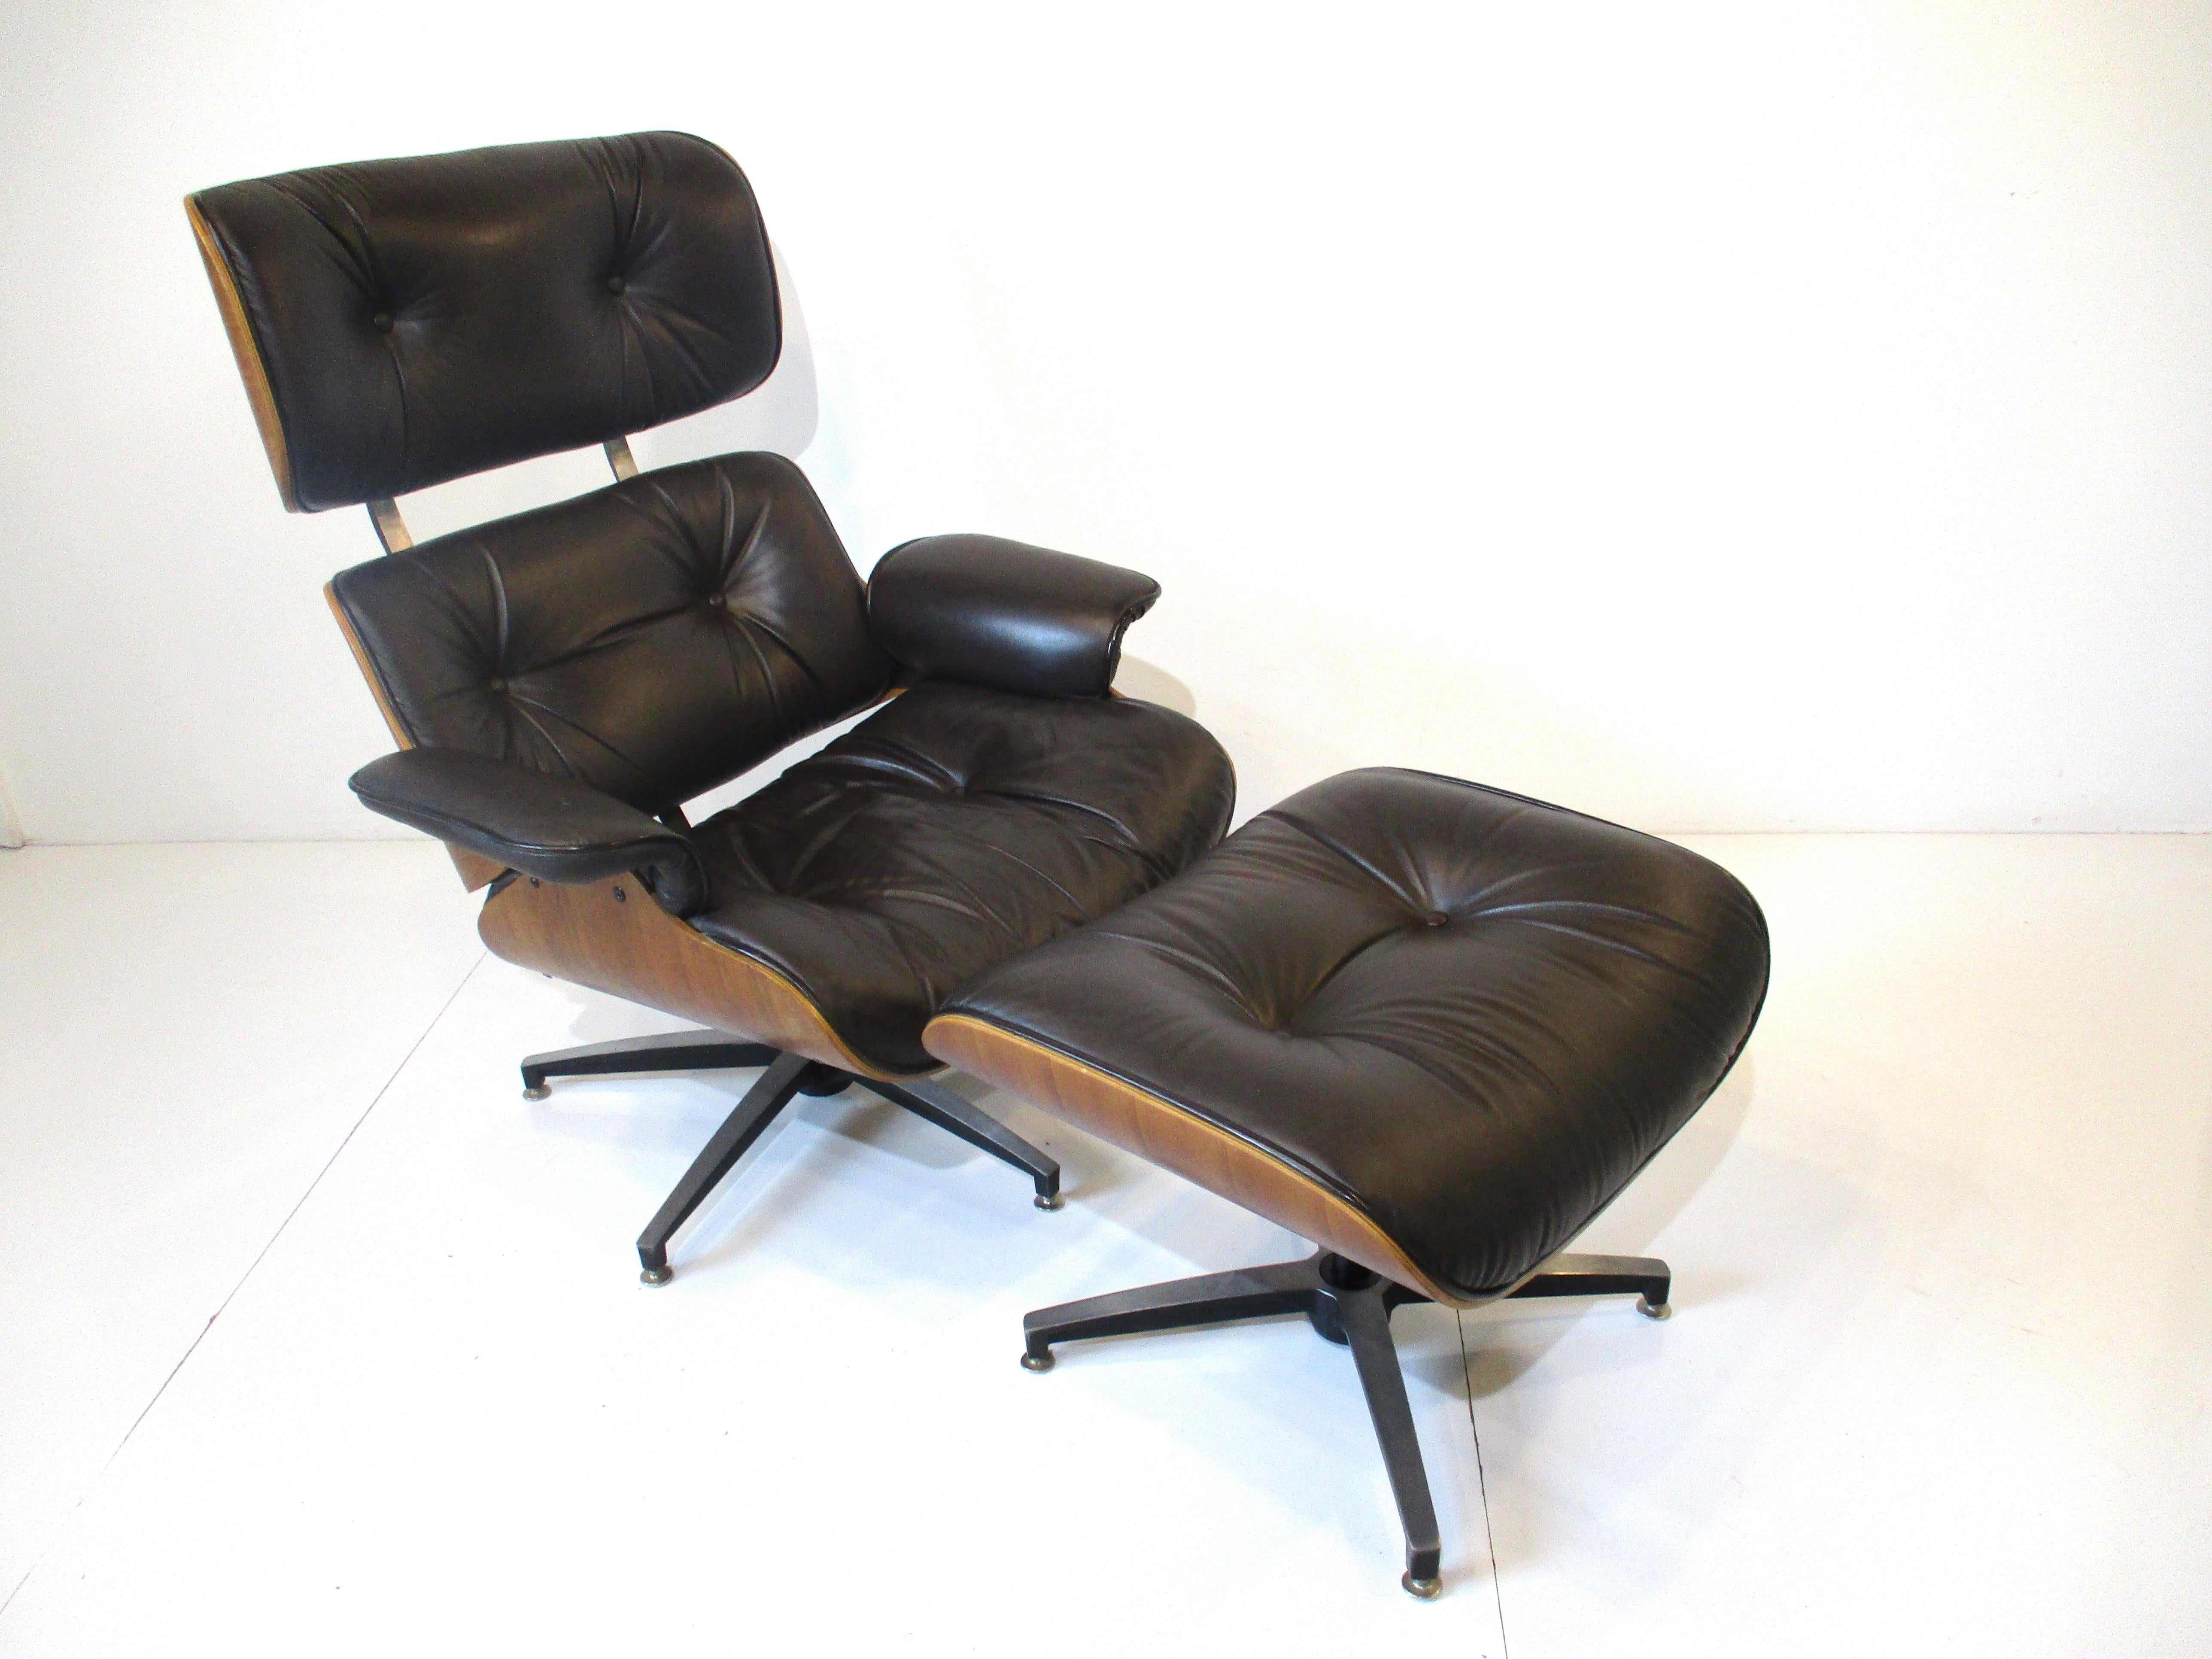 Selig Lounge Chair W/ Ottoman in Chocolate Leather in the Style of Eames 8